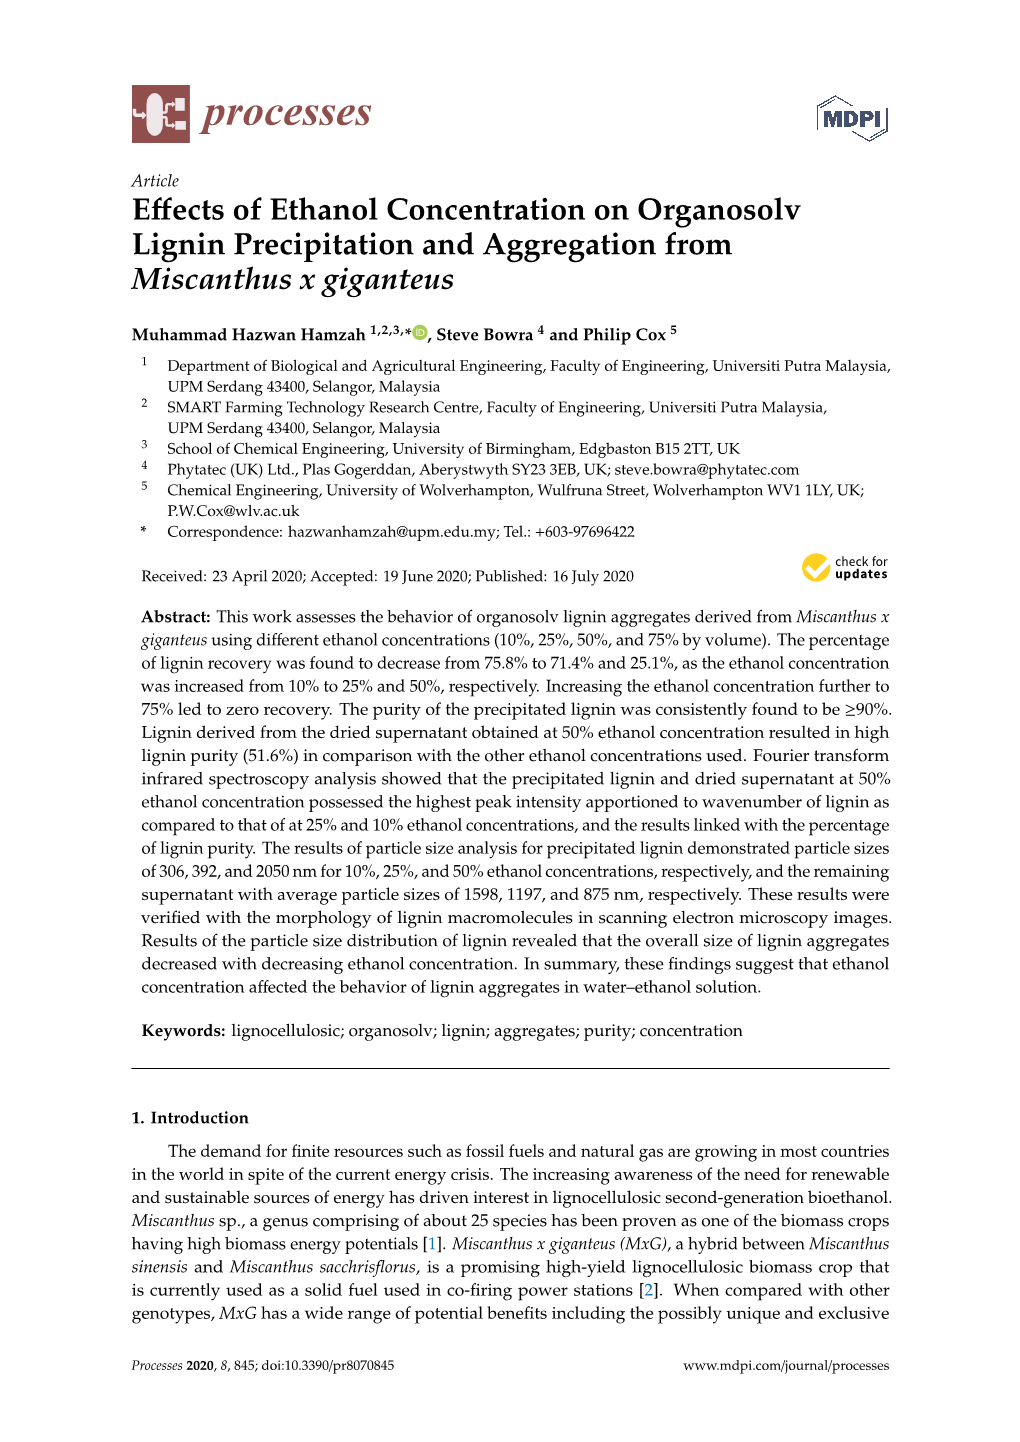 Effects of Ethanol Concentration on Organosolv Lignin Precipitation and Aggregation from Miscanthus X Giganteus